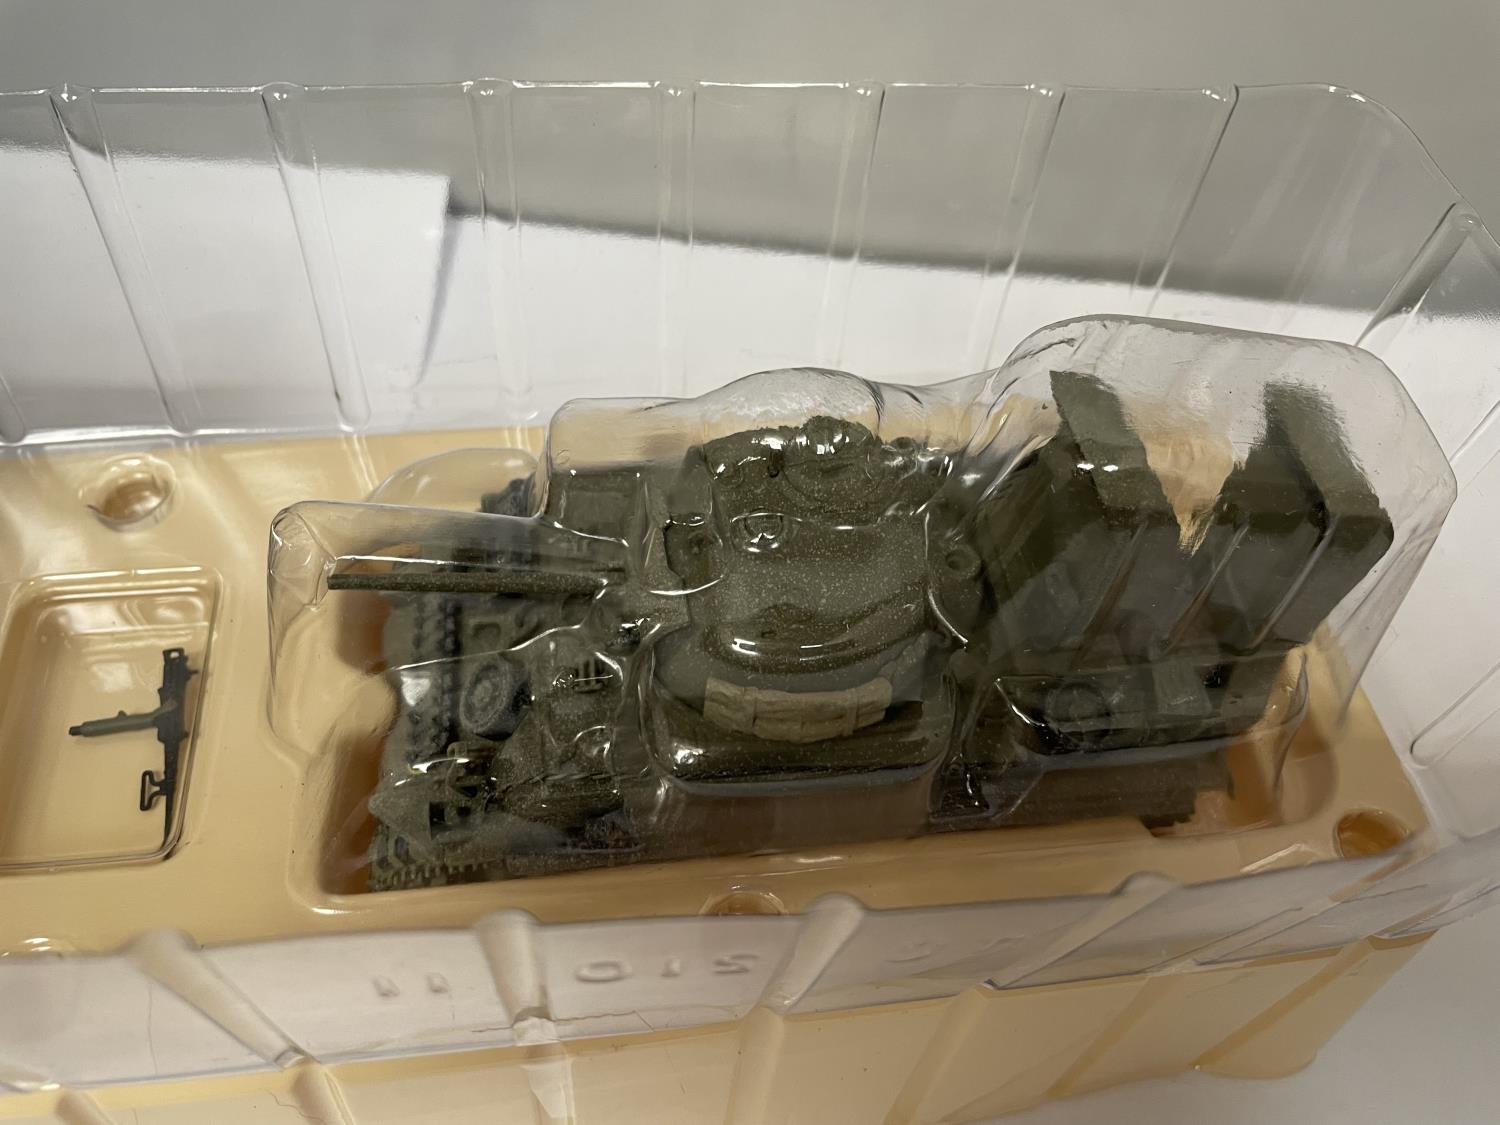 A BOXED CORGI MODEL SHERMAN TANK FROM THE D-DAY 60TH ANNIVERSARY RANGE - Image 2 of 3